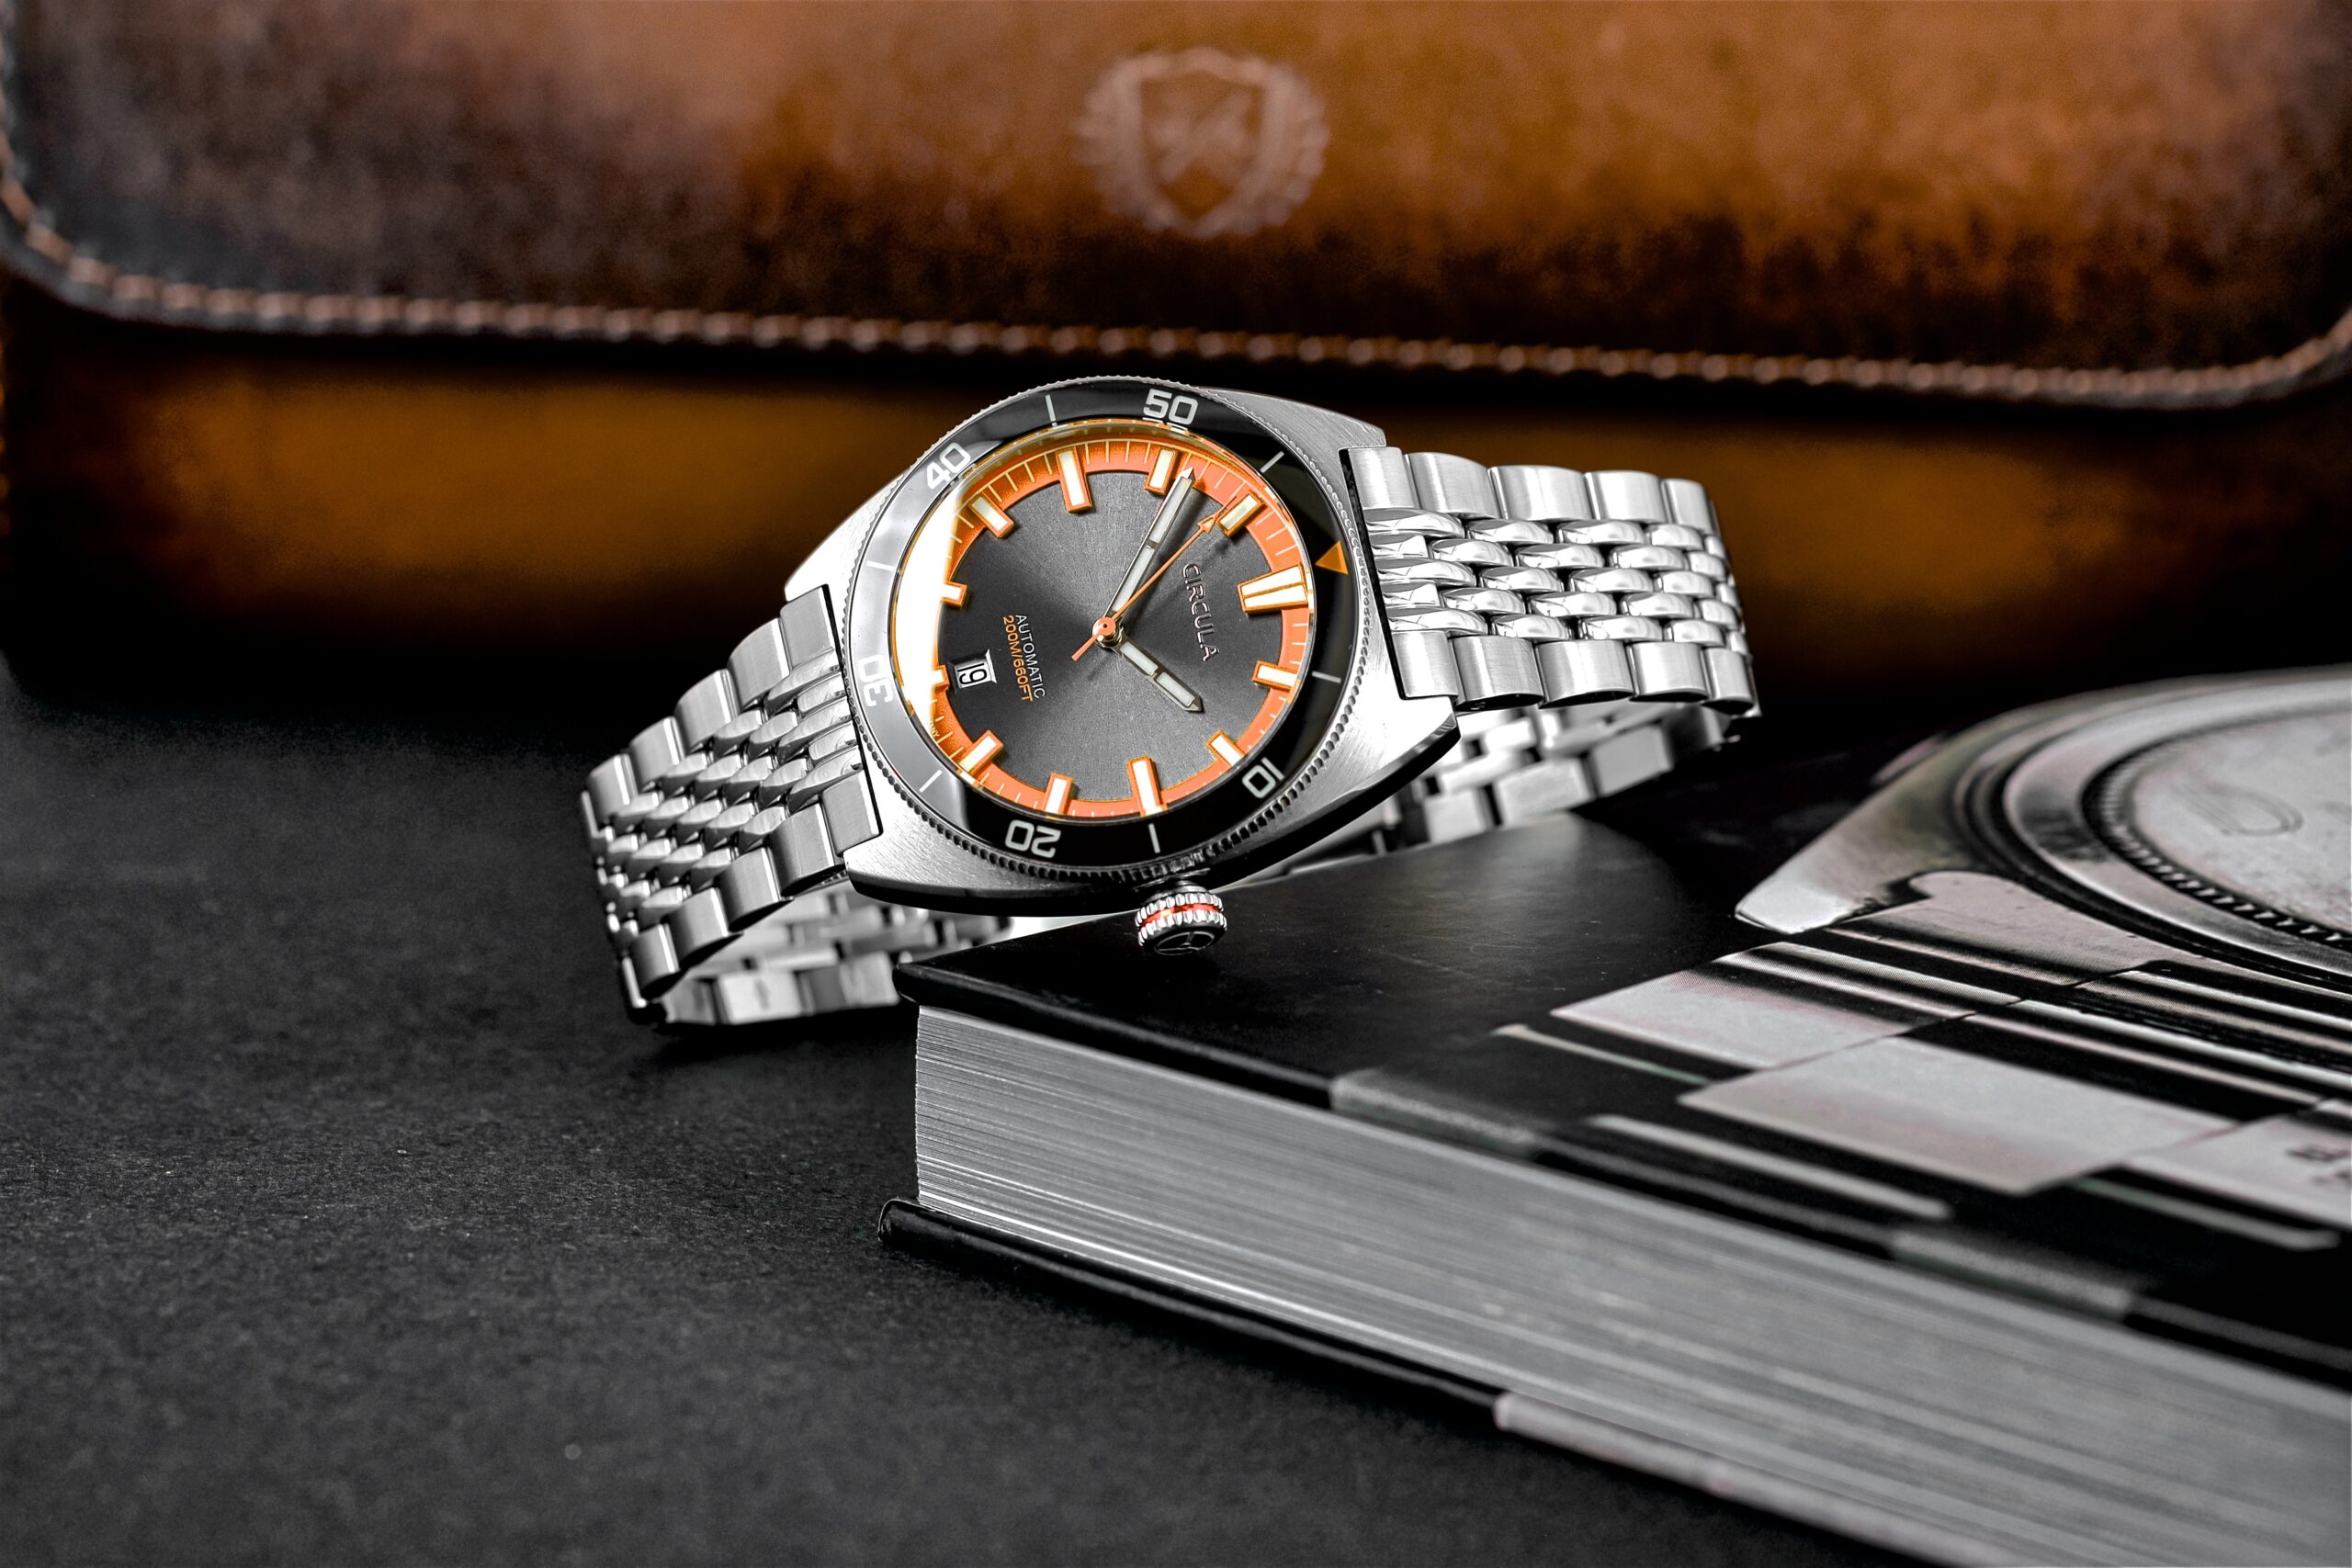 Circula AquaSport Diver: 1970s Skin Diver-Style Watch With Modern Colors And Materials